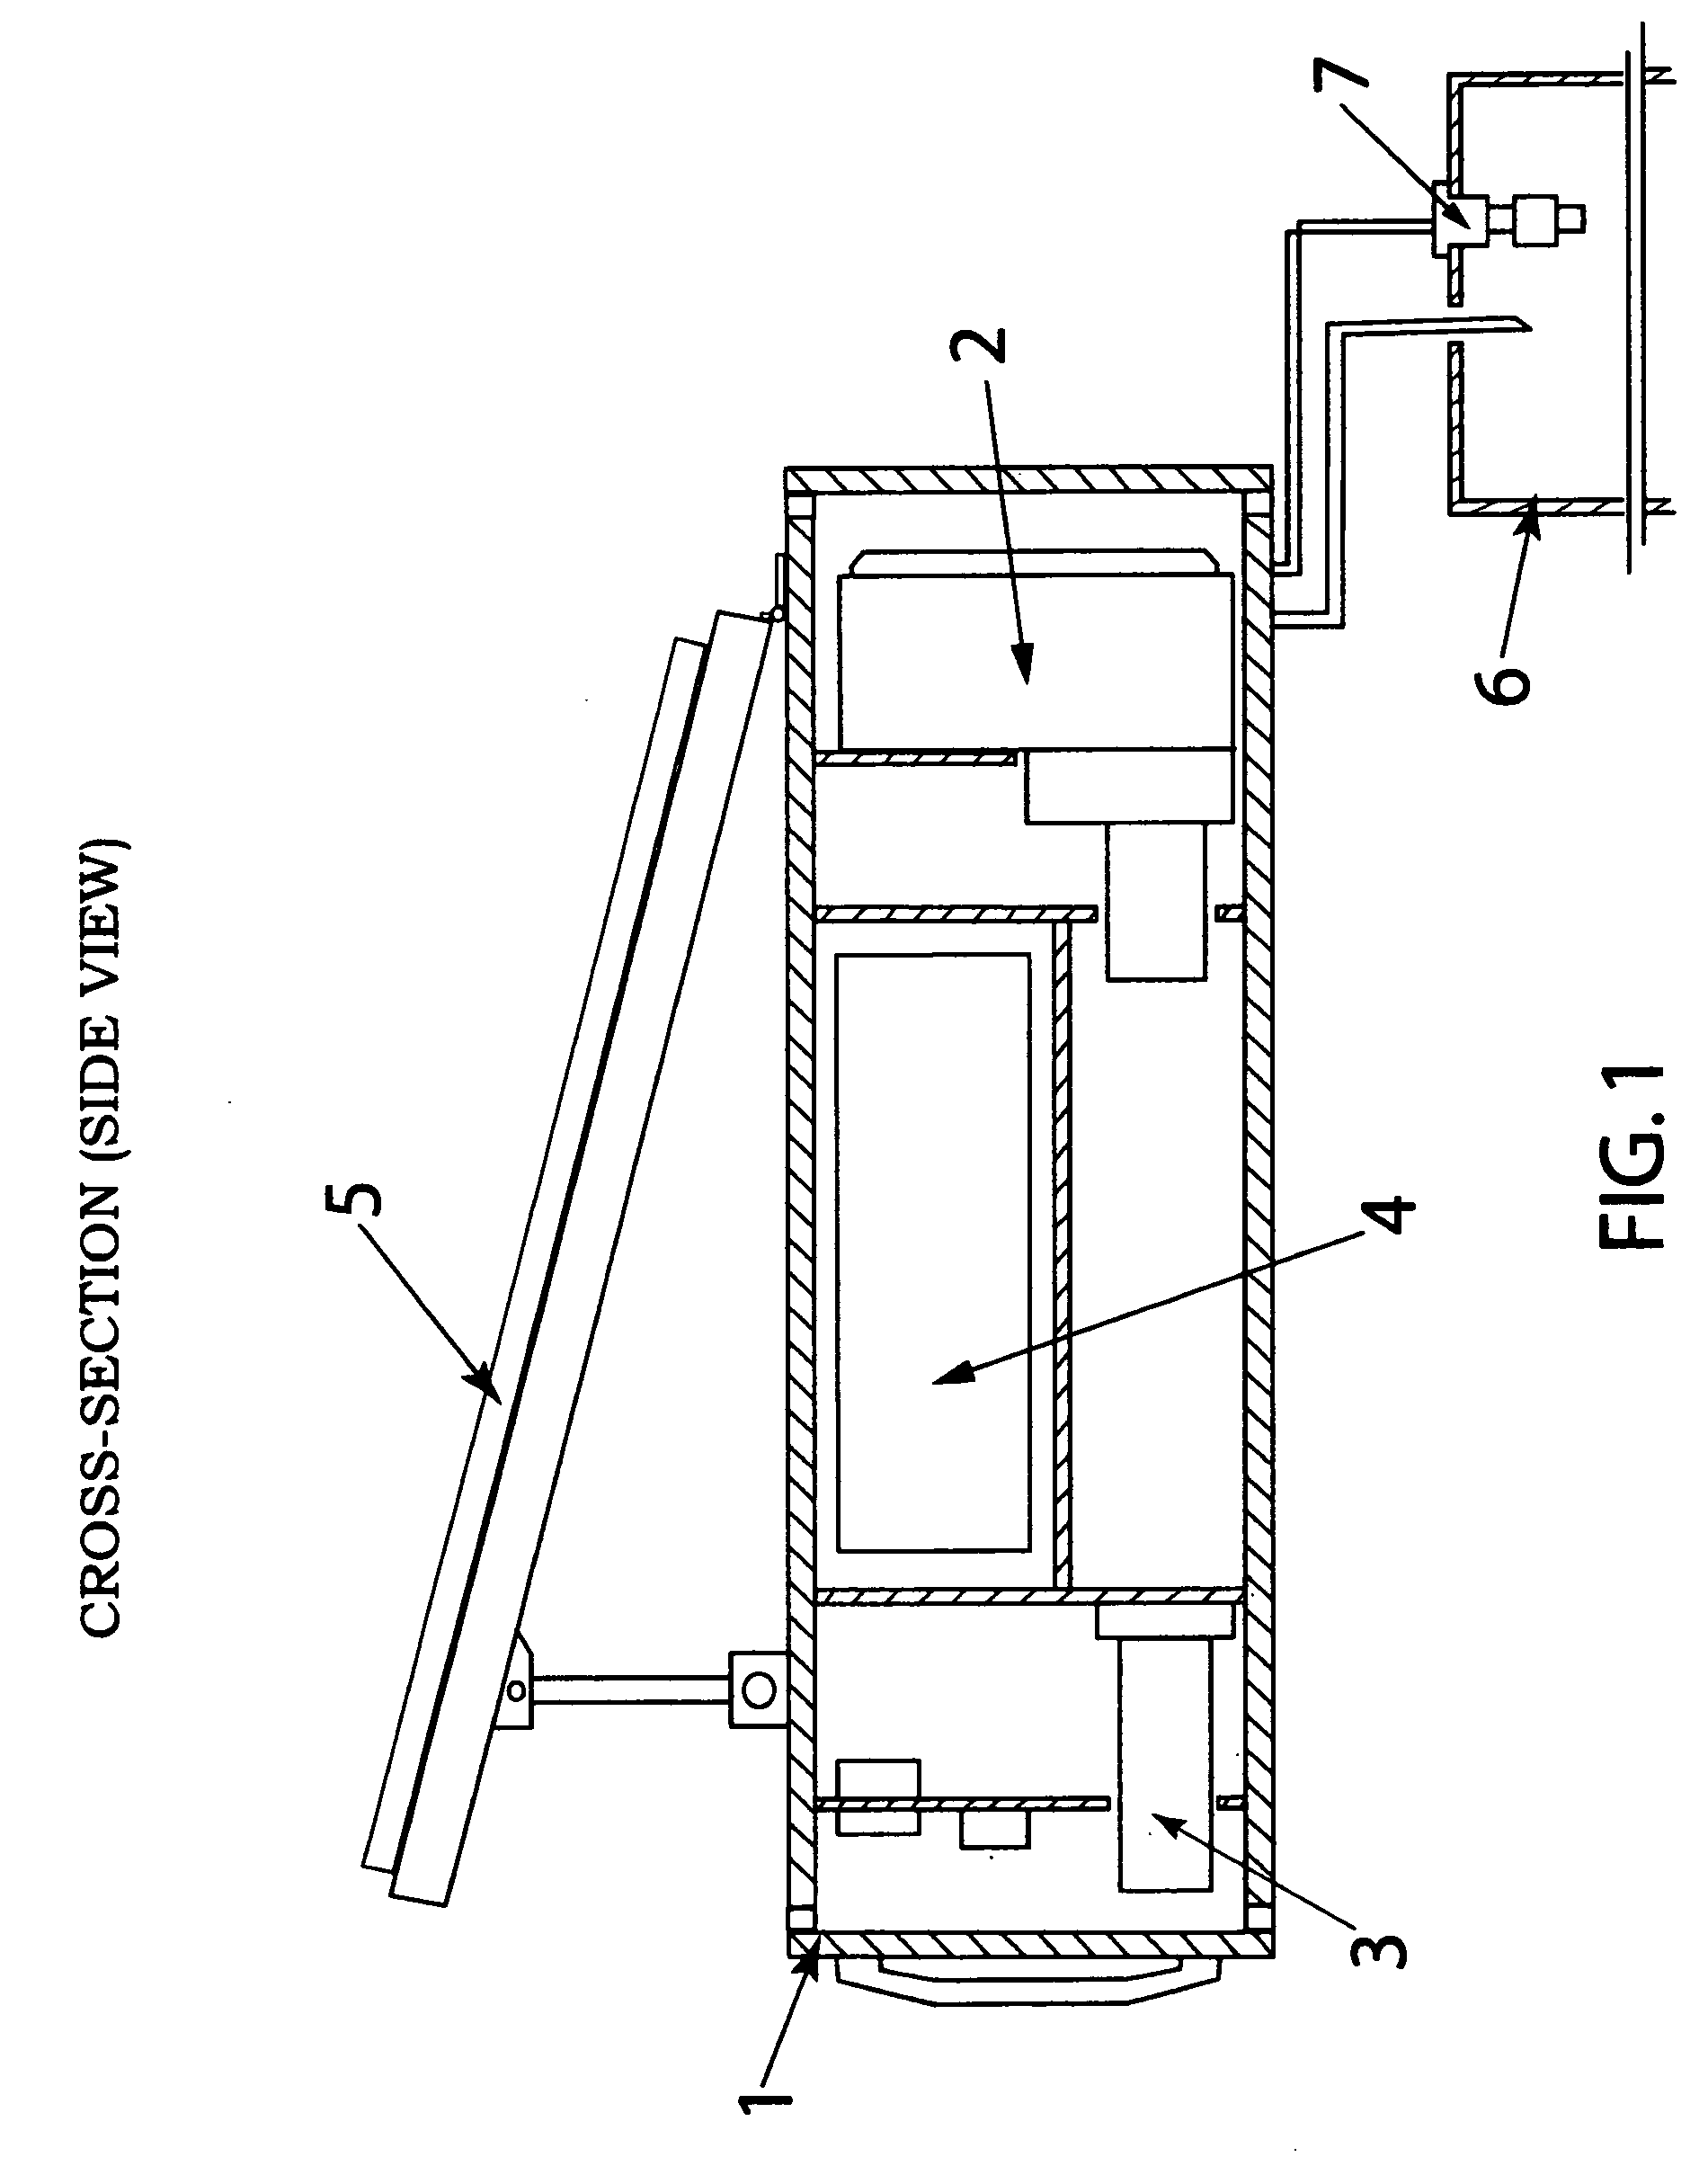 Portable self-powered recovery system for contaminated fluids